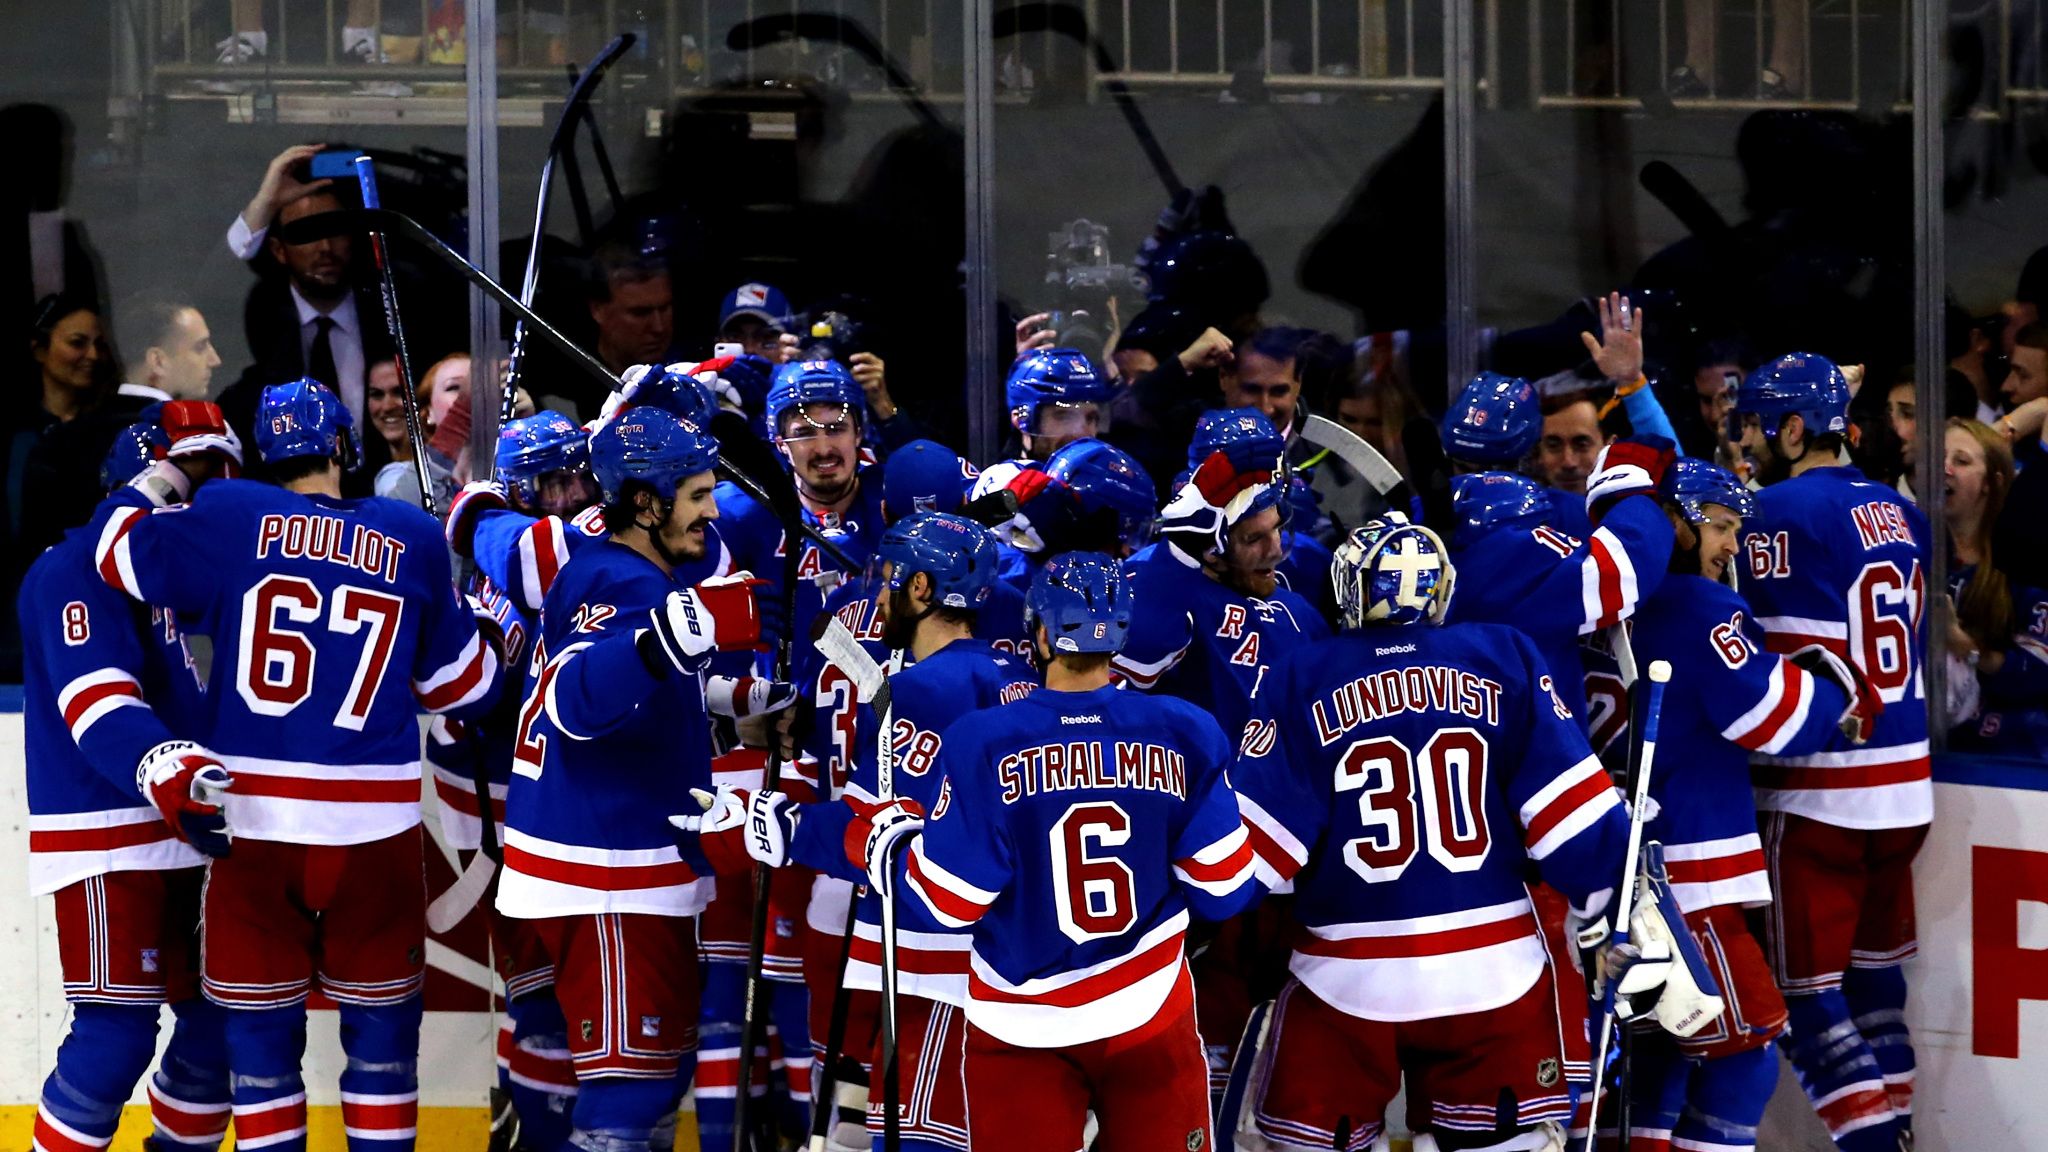 Rangers win the Stanley Cup